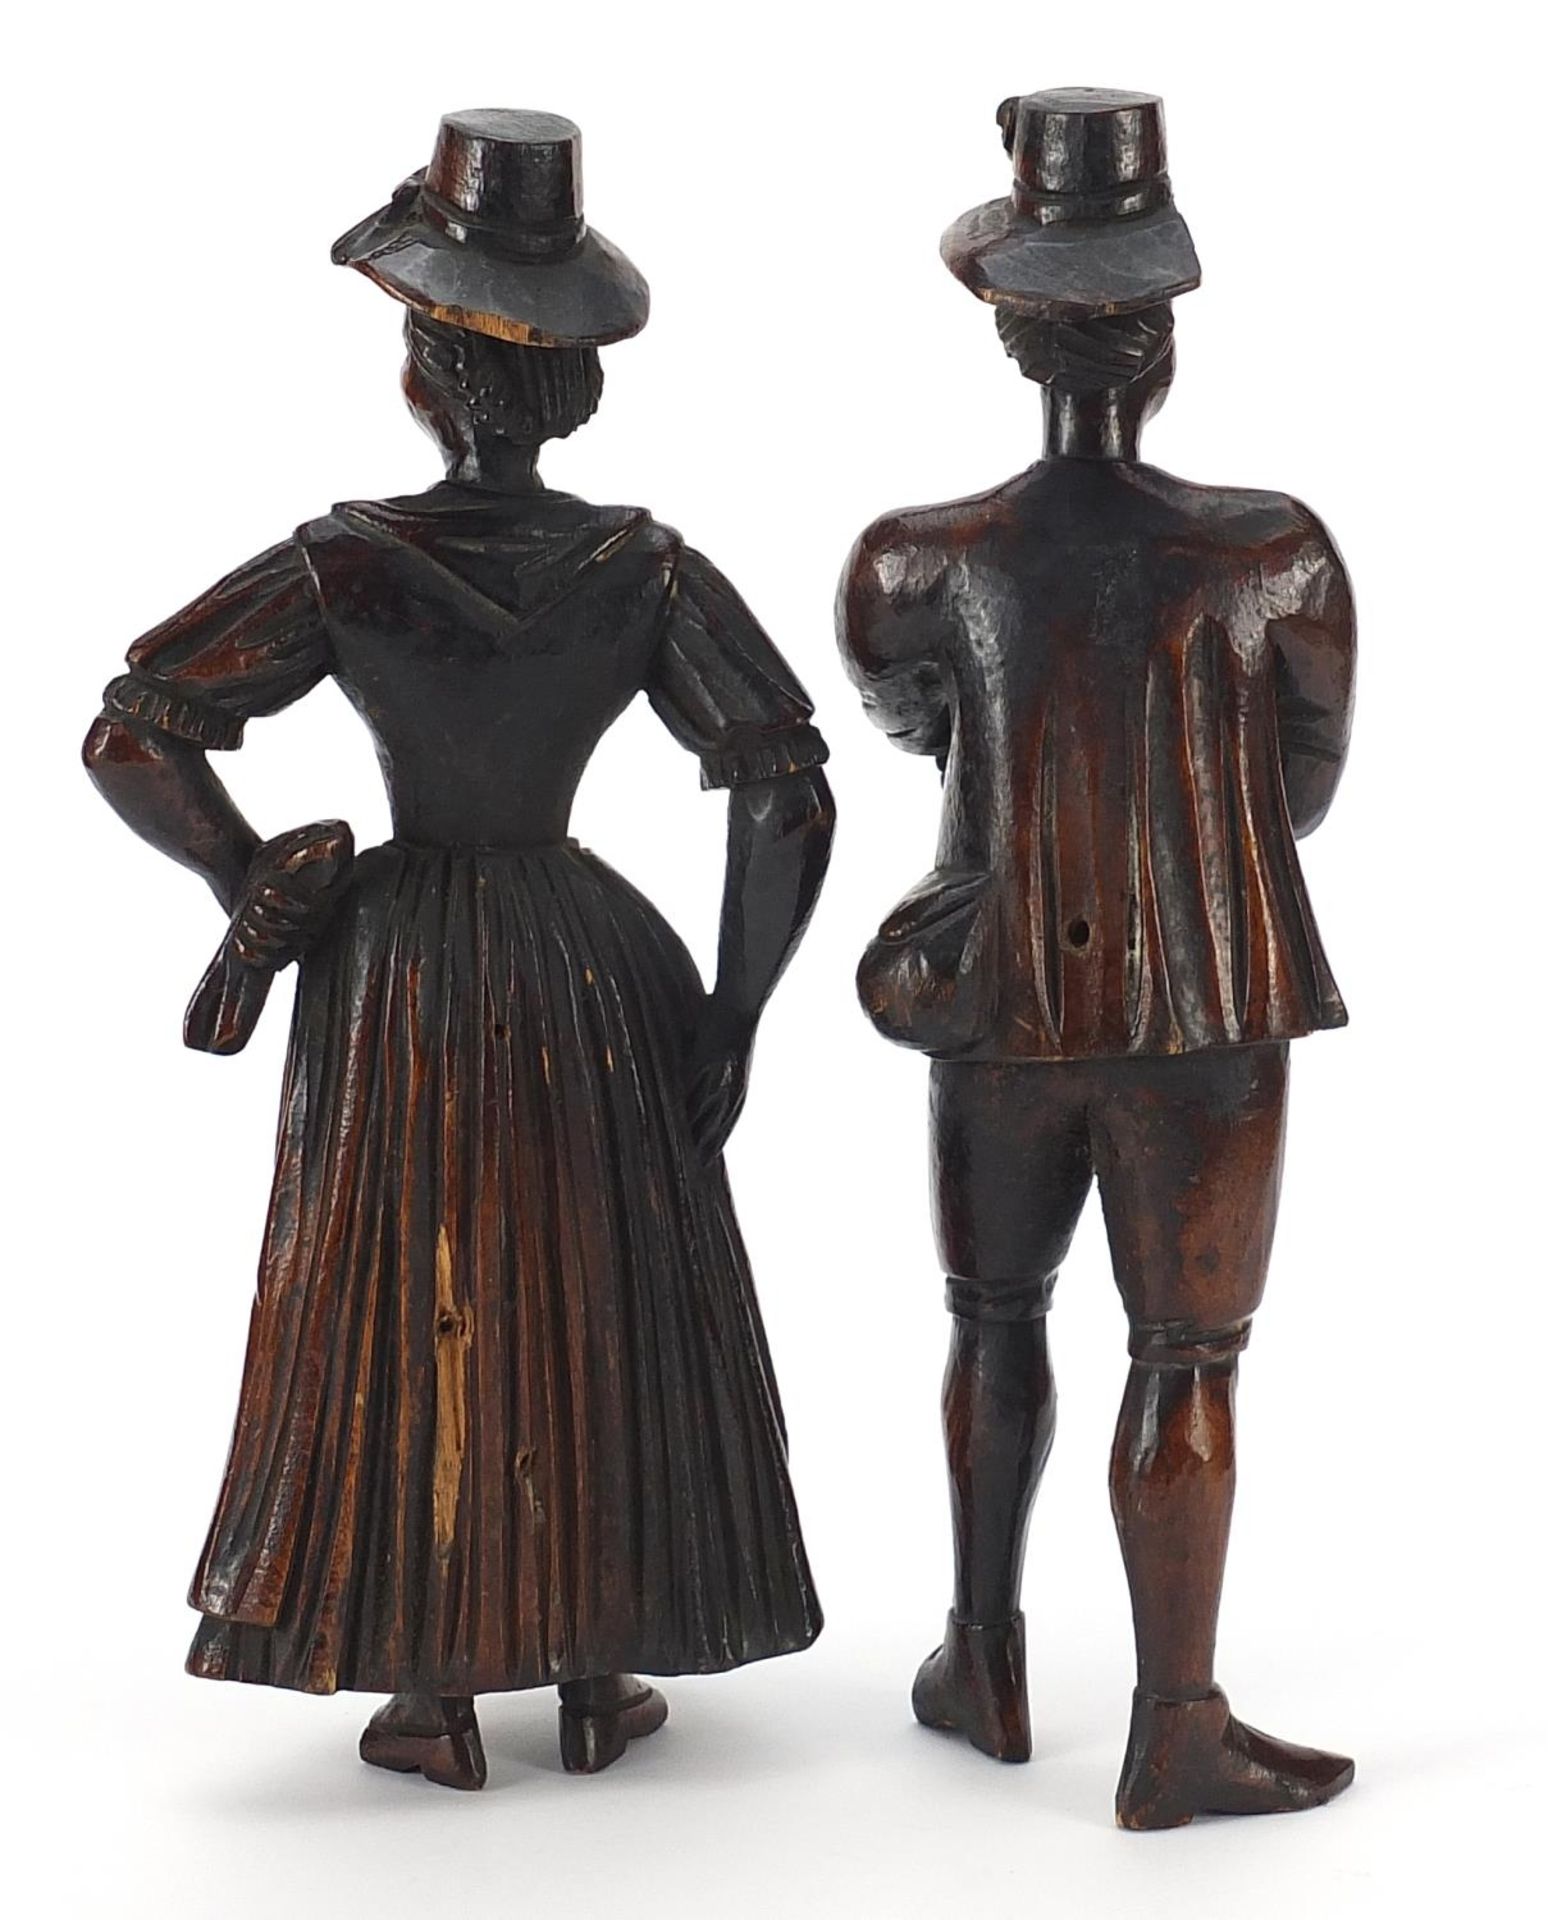 Pair of antique continental wood carvings of peasants in 18th century dress, the largest 22cm high - Image 2 of 3